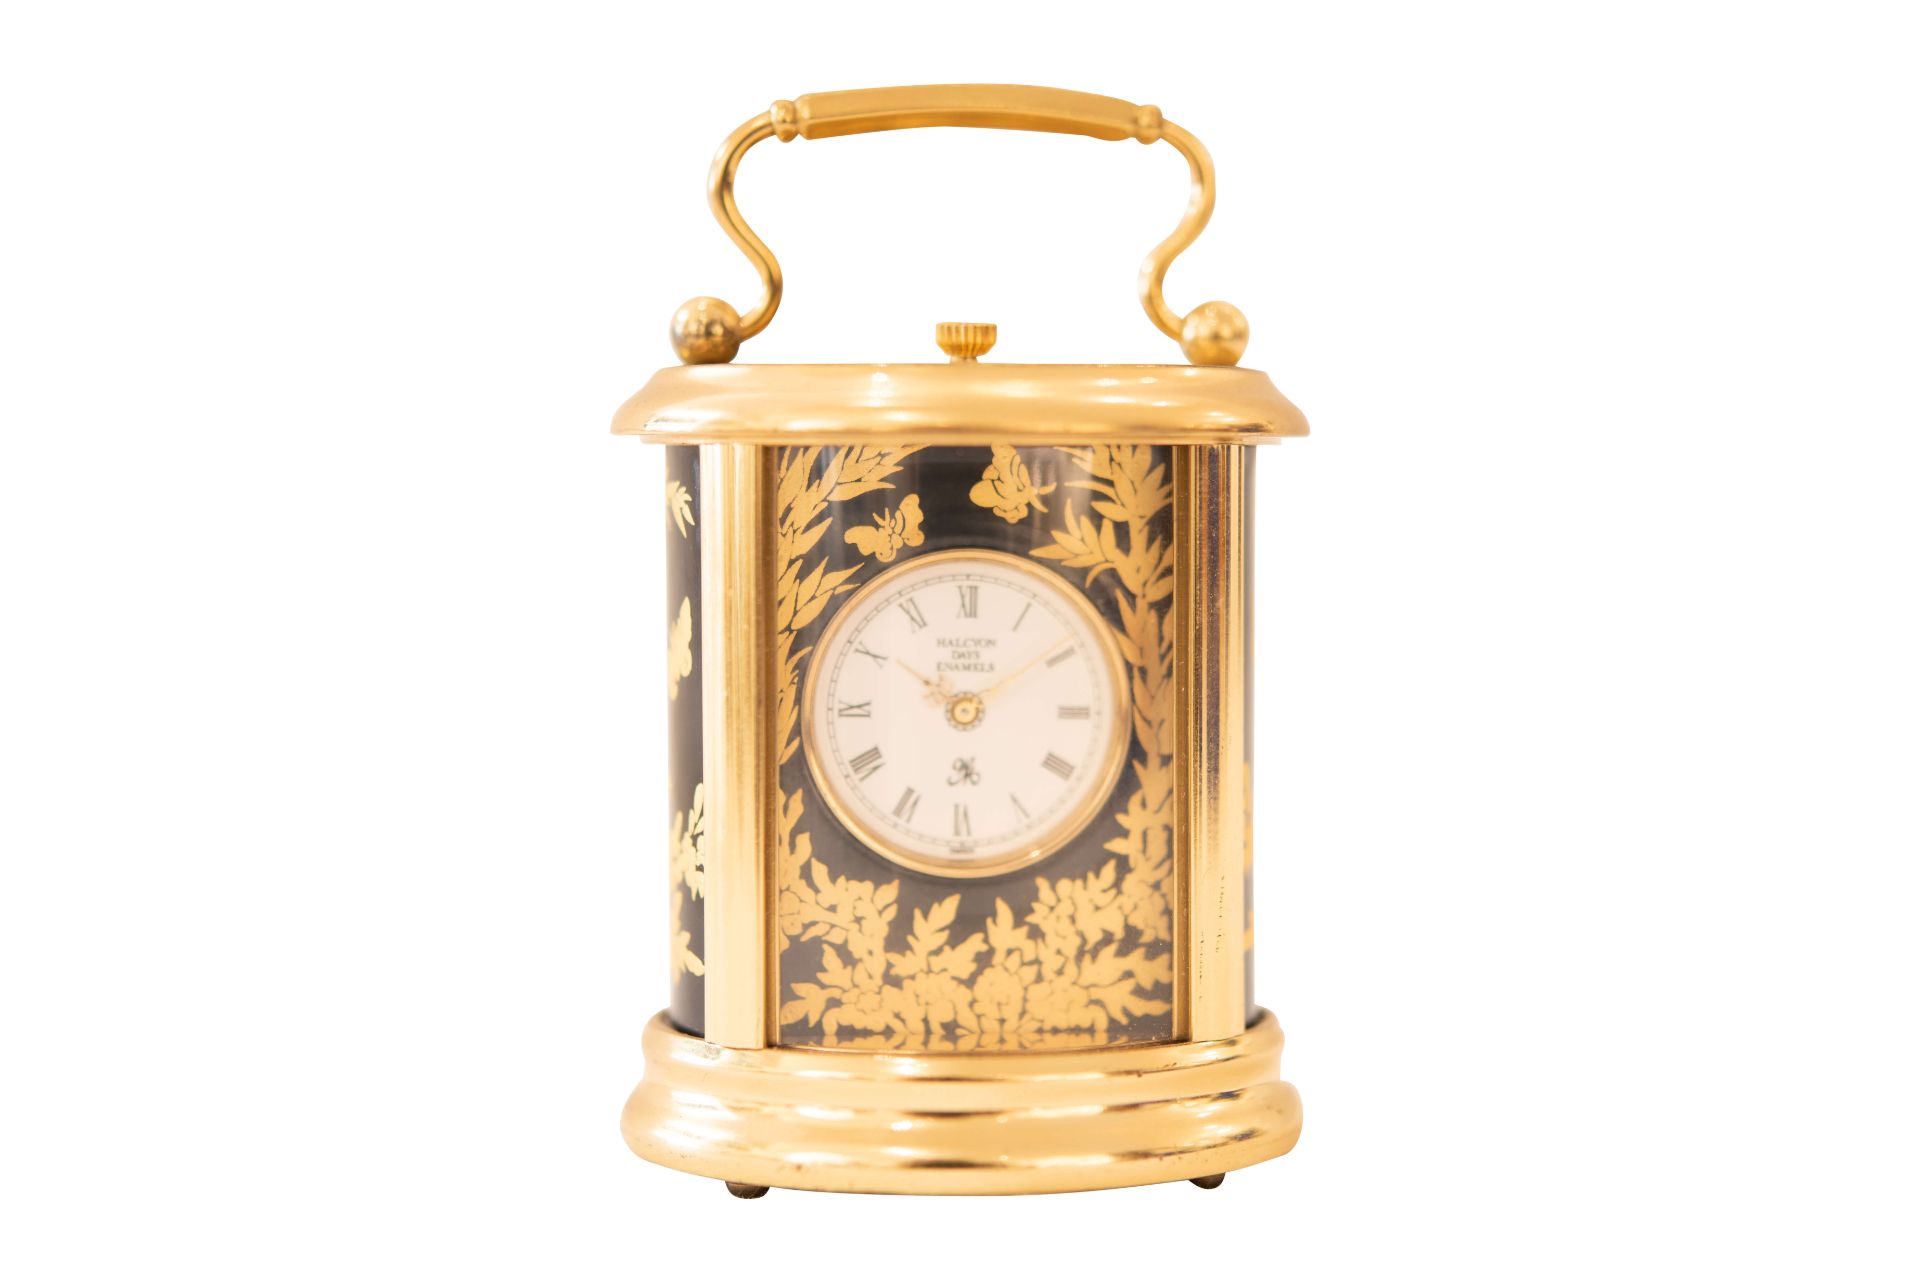 Halcyon Days ovale Uhr mit Griff |Halcyon Days Oval Clock with Handle